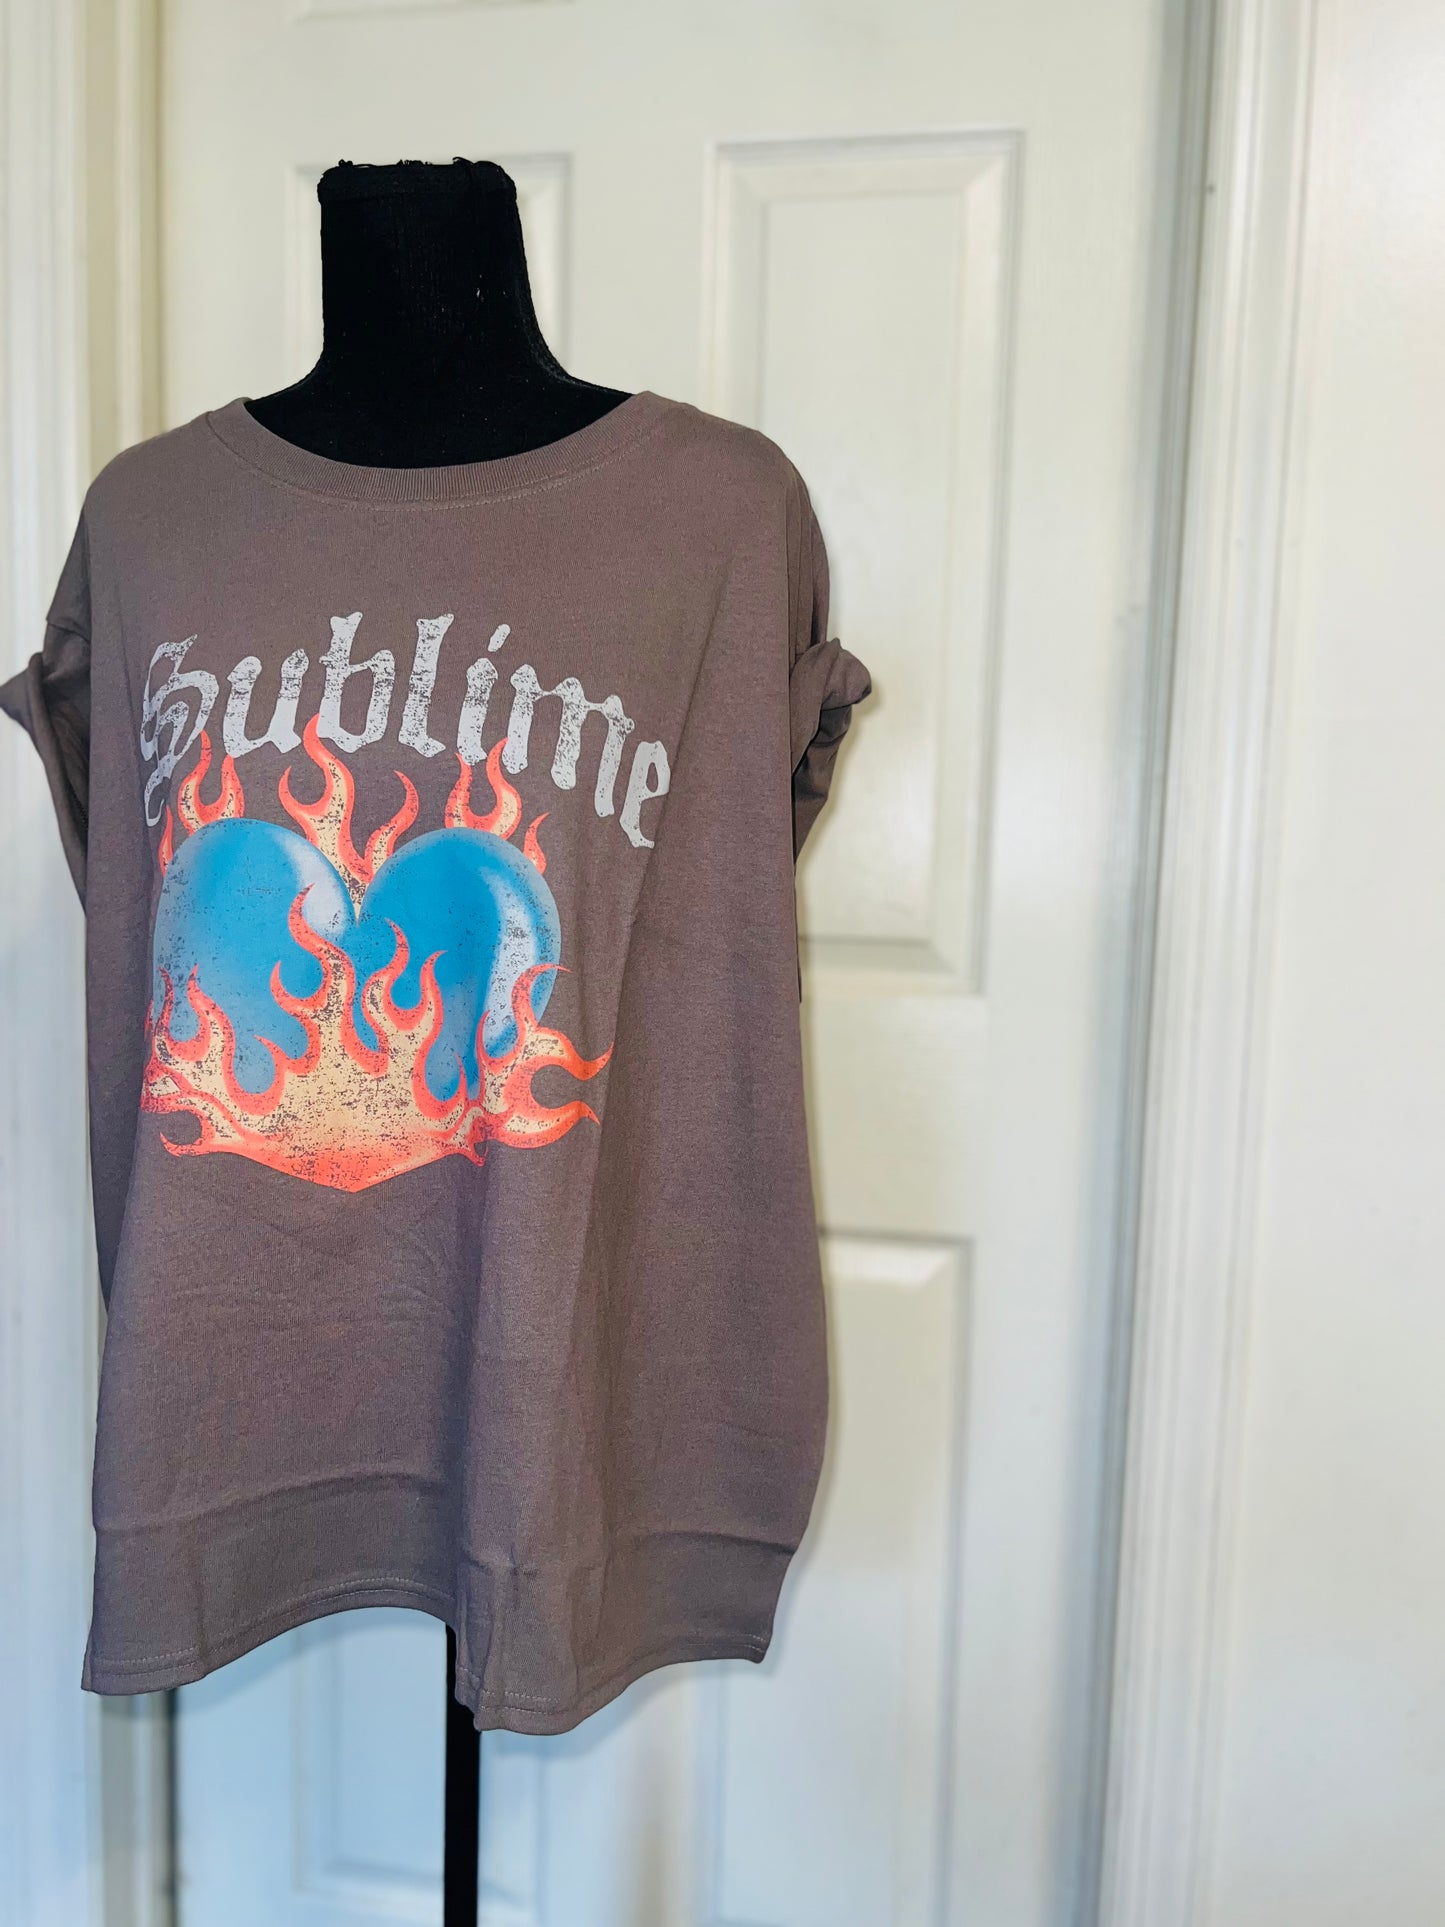 Sublime Oversized Distressed Tee